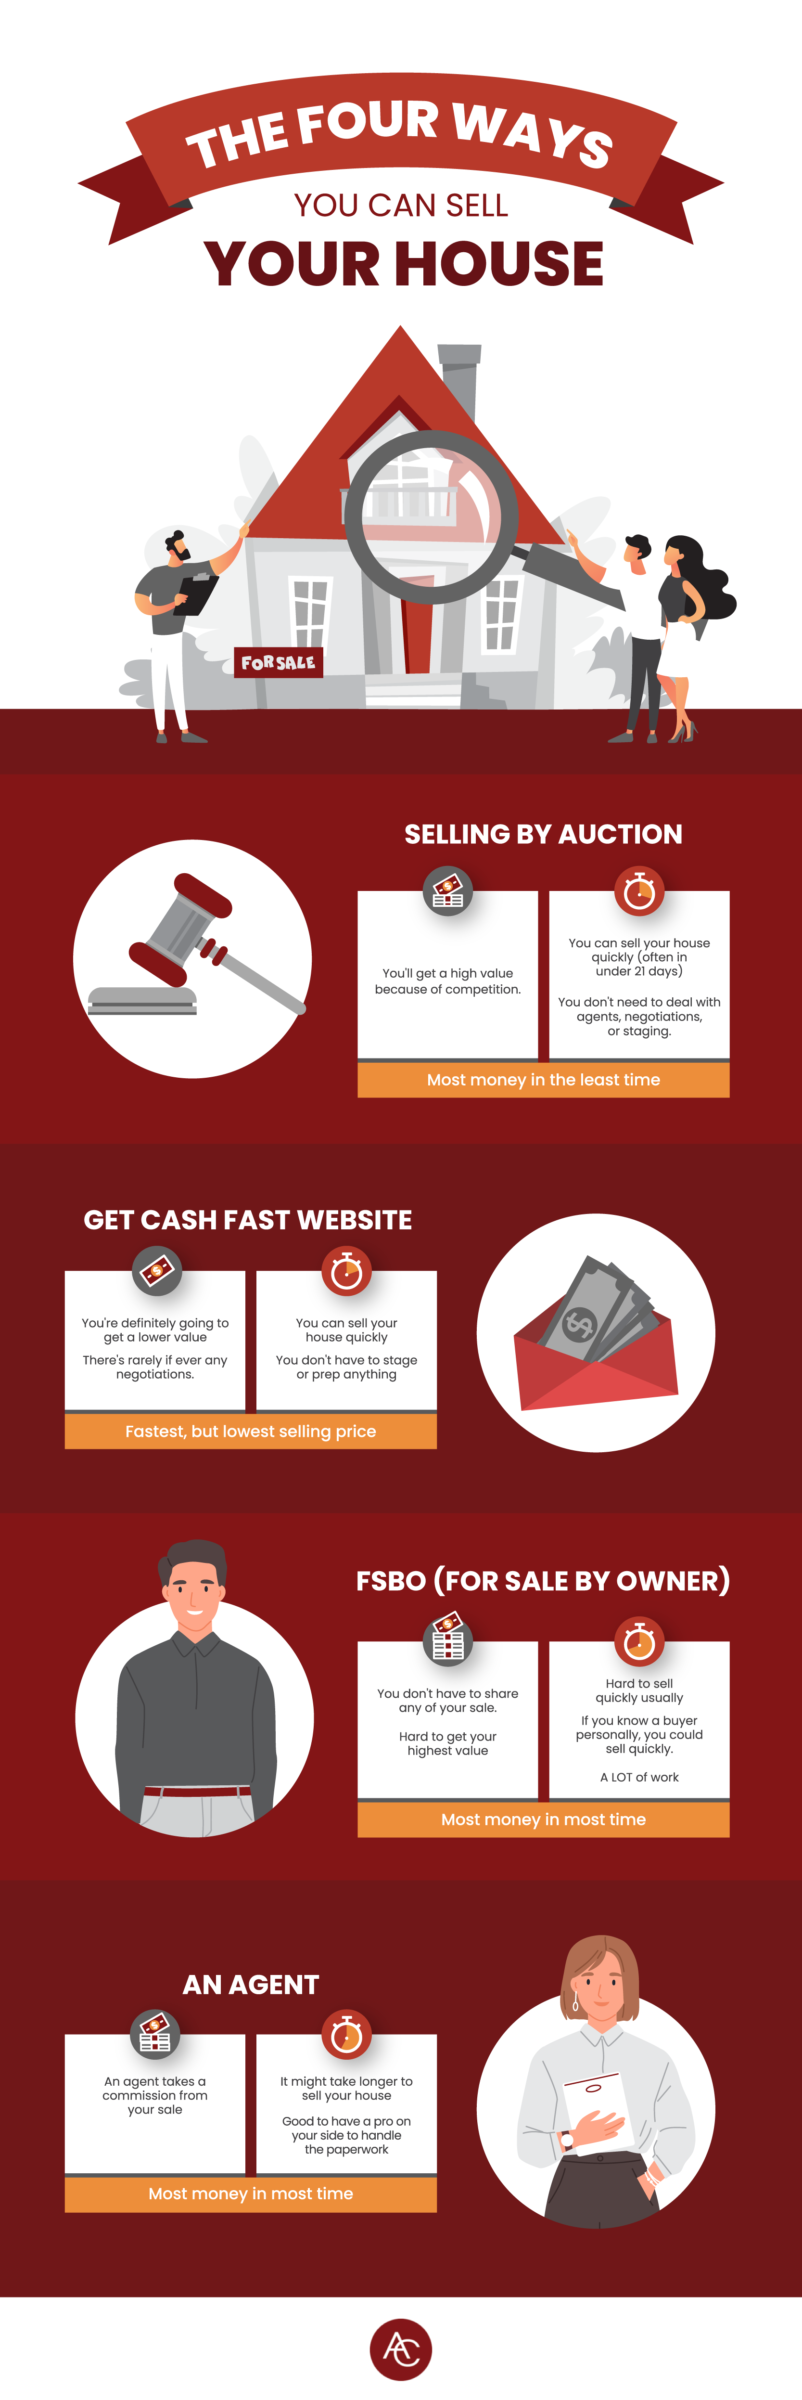 Infographic on the four ways you can sell your house from Alex Cooper